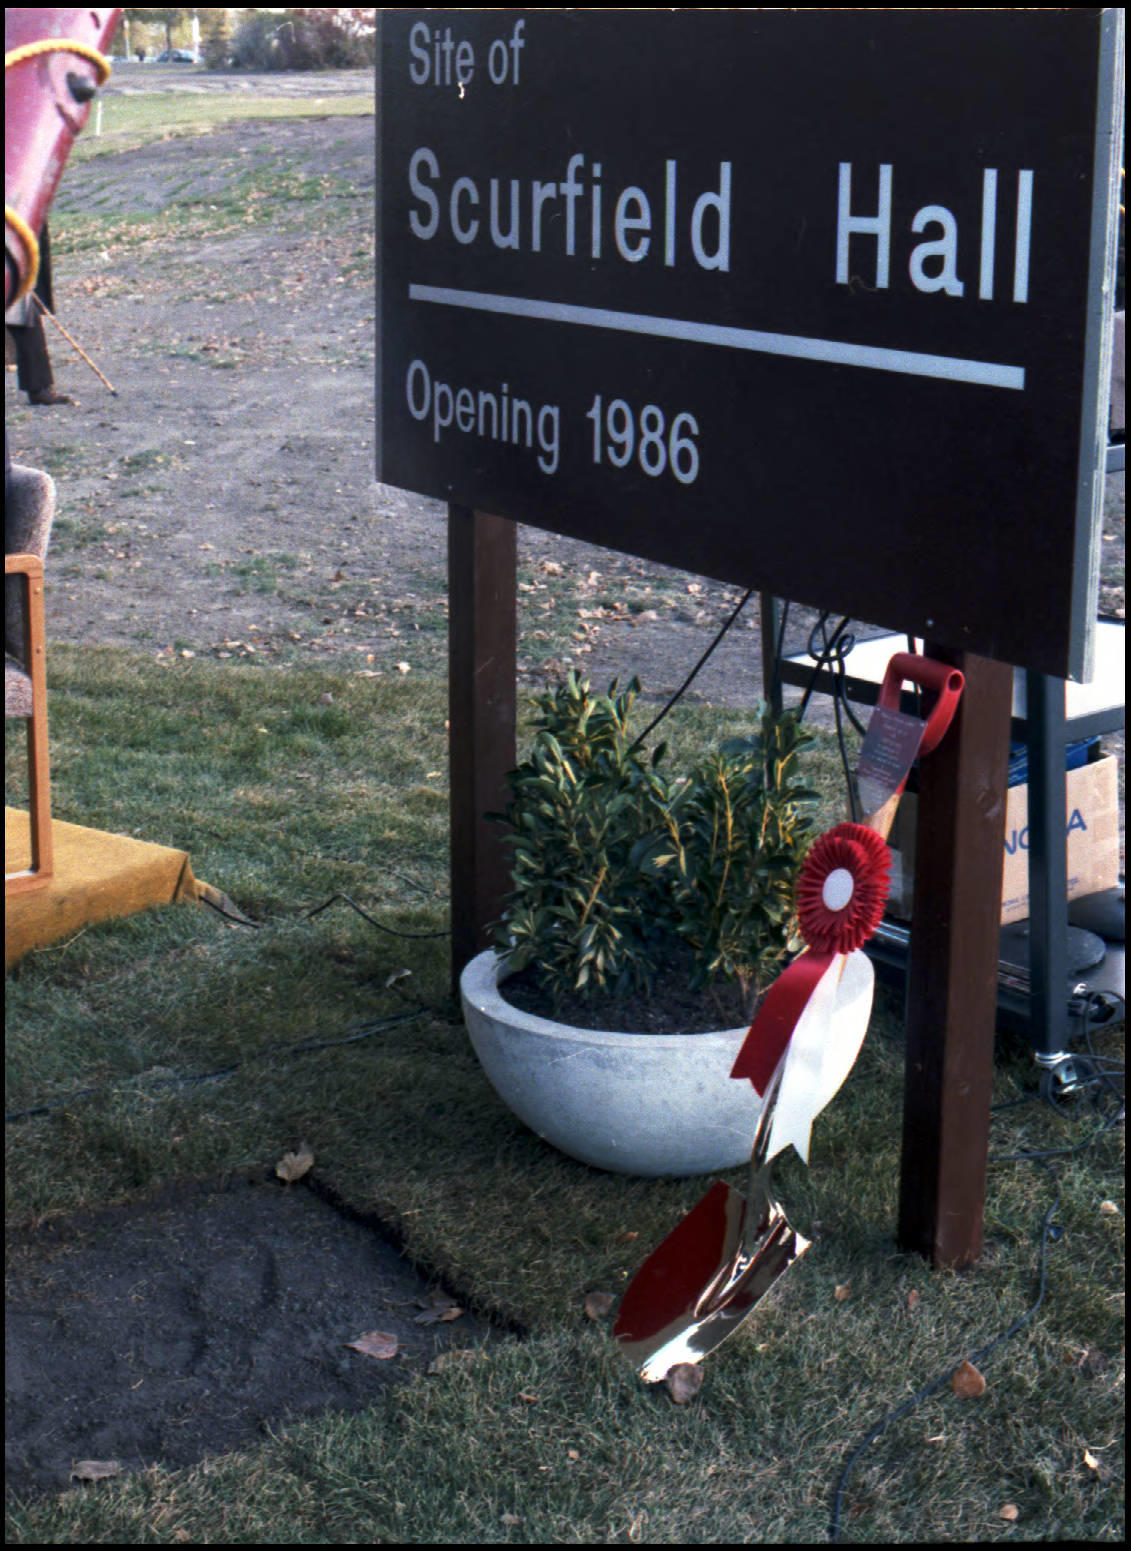 A sign designating the site of Scurfield Hall during the sod turning ceremony